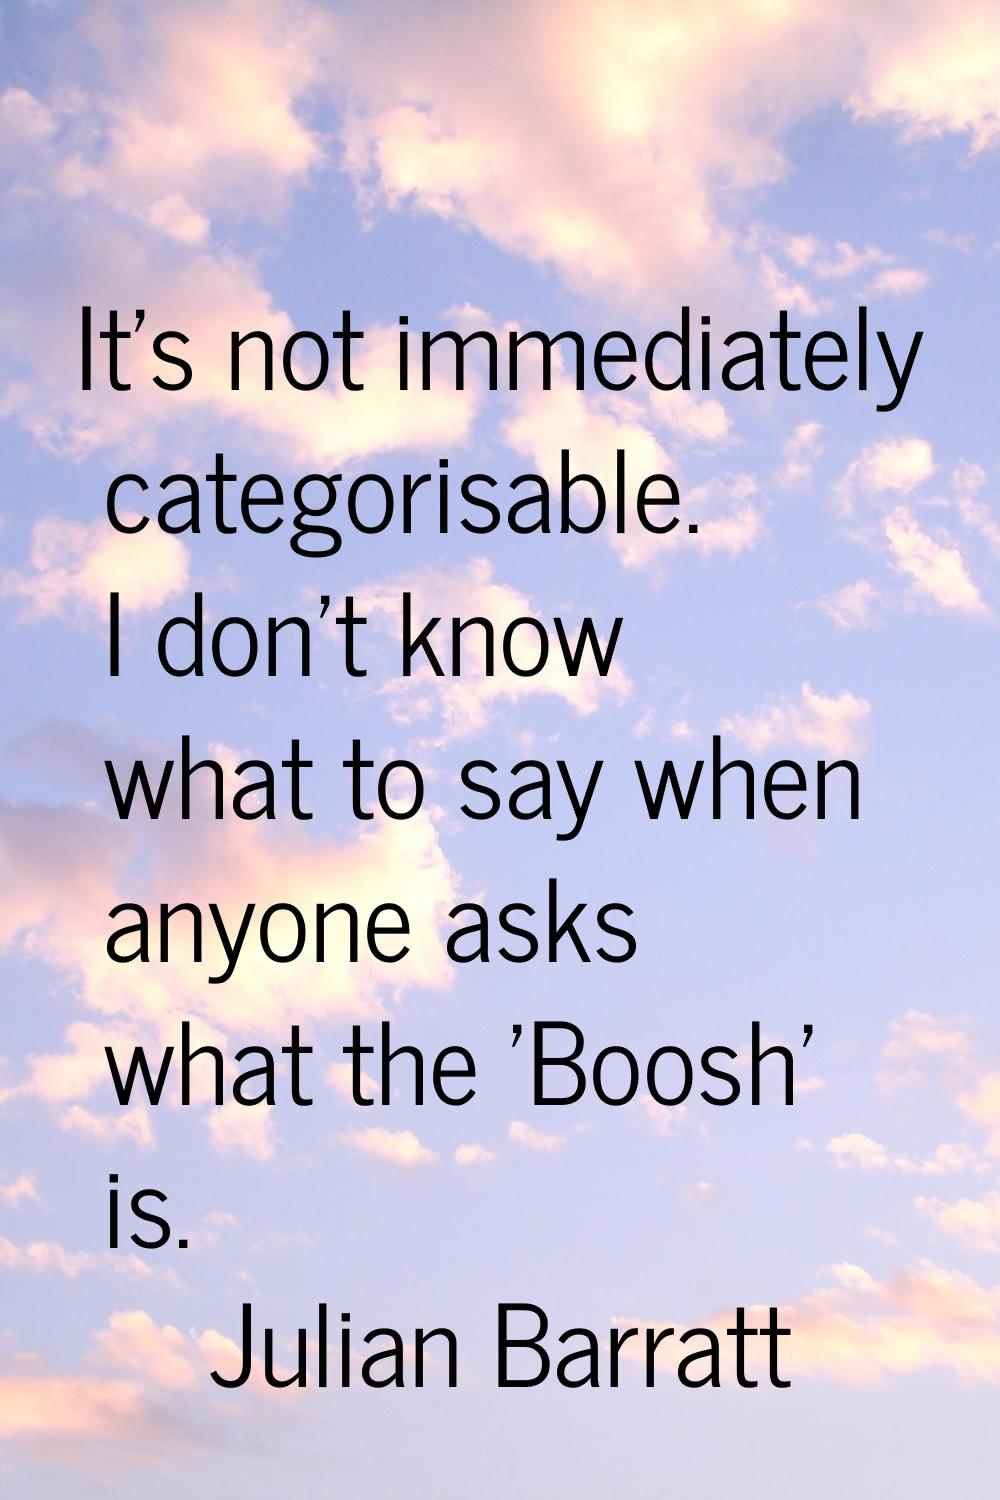 It's not immediately categorisable. I don't know what to say when anyone asks what the 'Boosh' is.